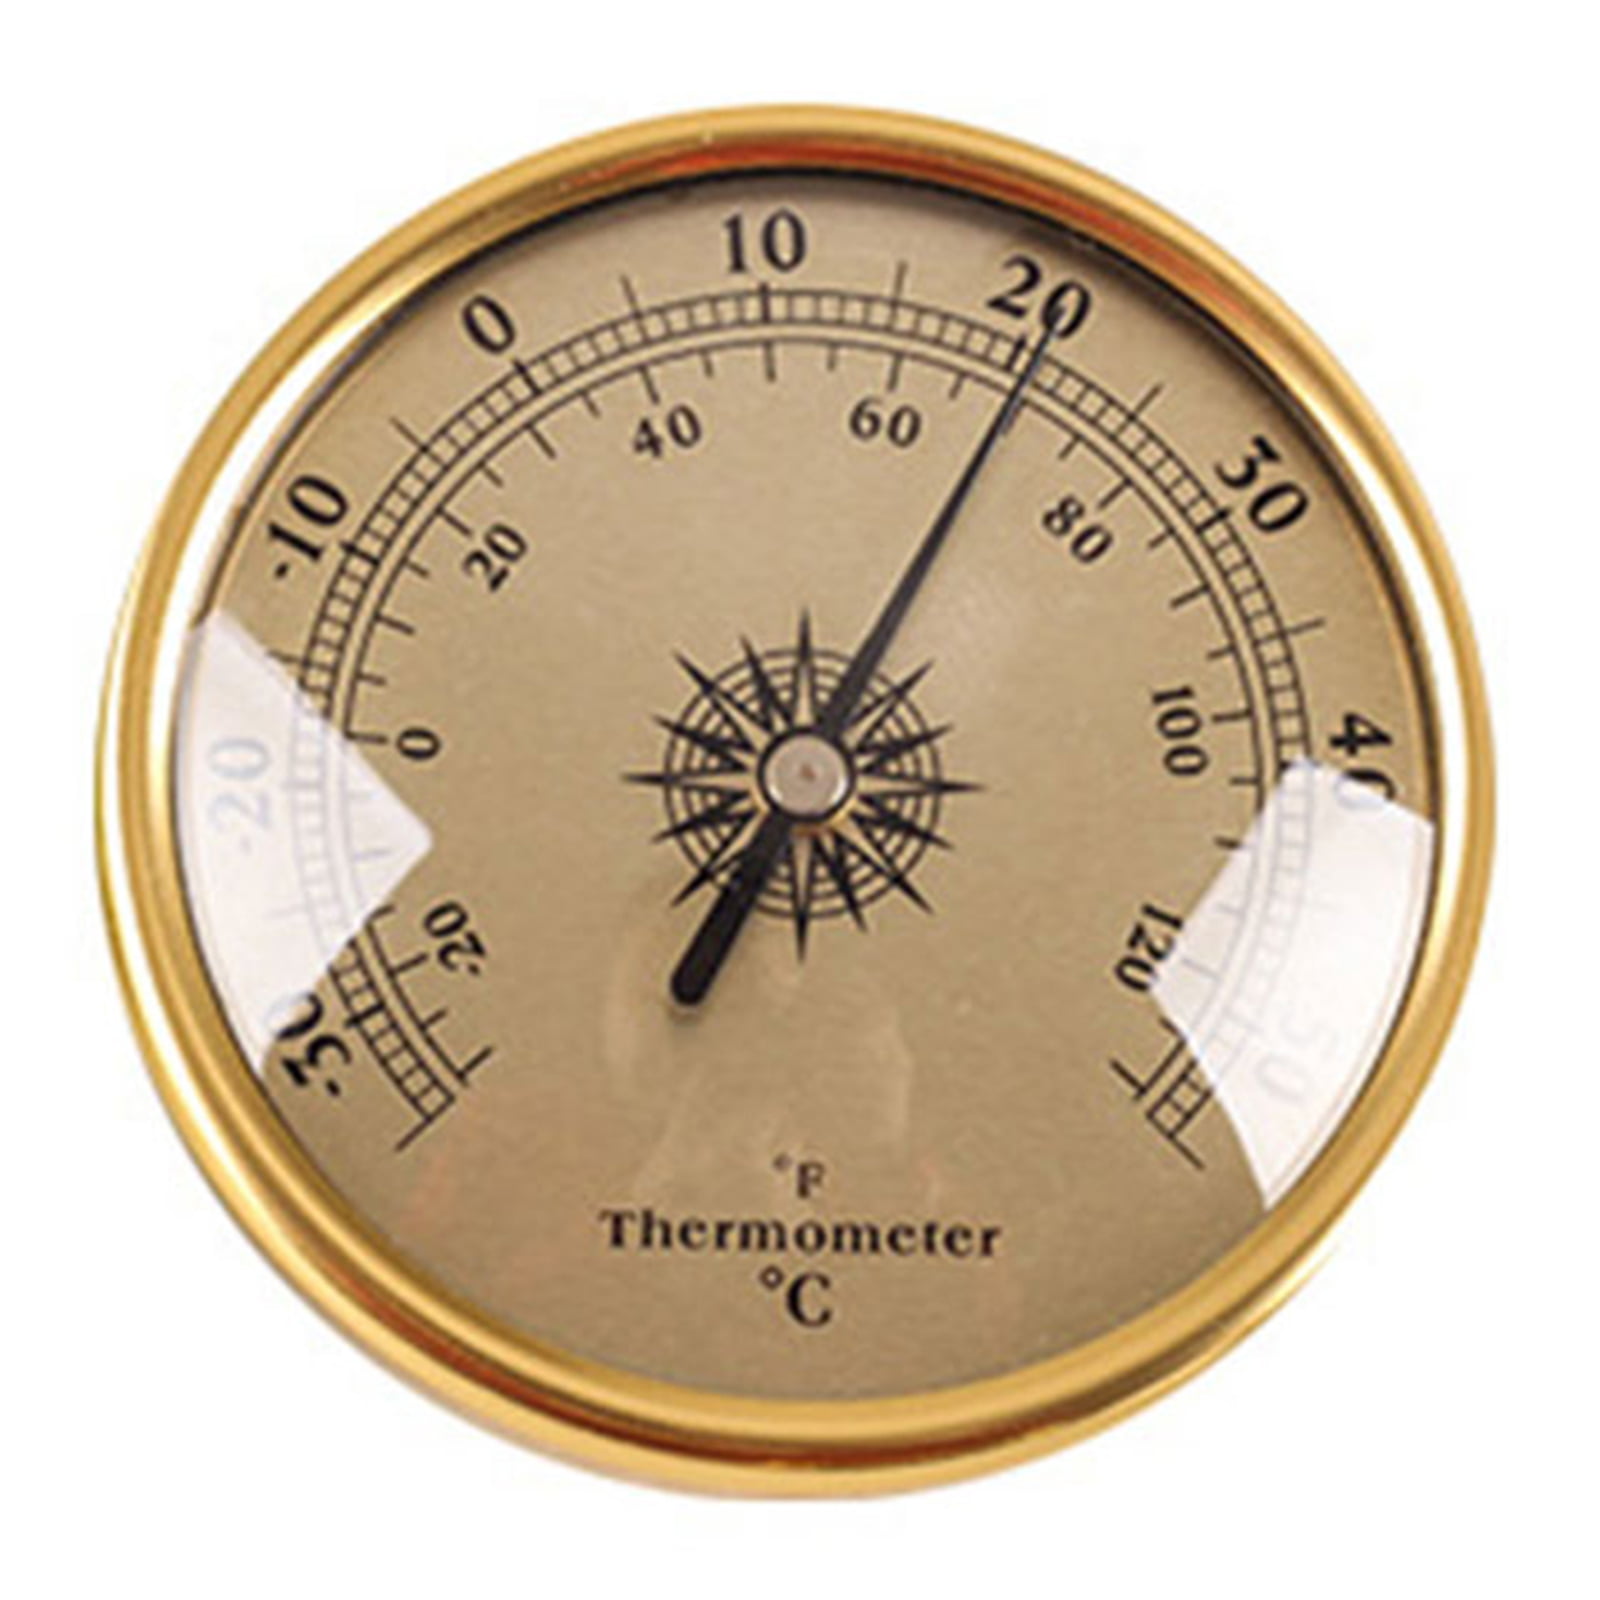 Camco TRAC Outdoors Fishing Barometer | Features an Adjustable Pressure  Change Indicator, Reference Marker & Color-Coded Dial | Easily Calibrates  to